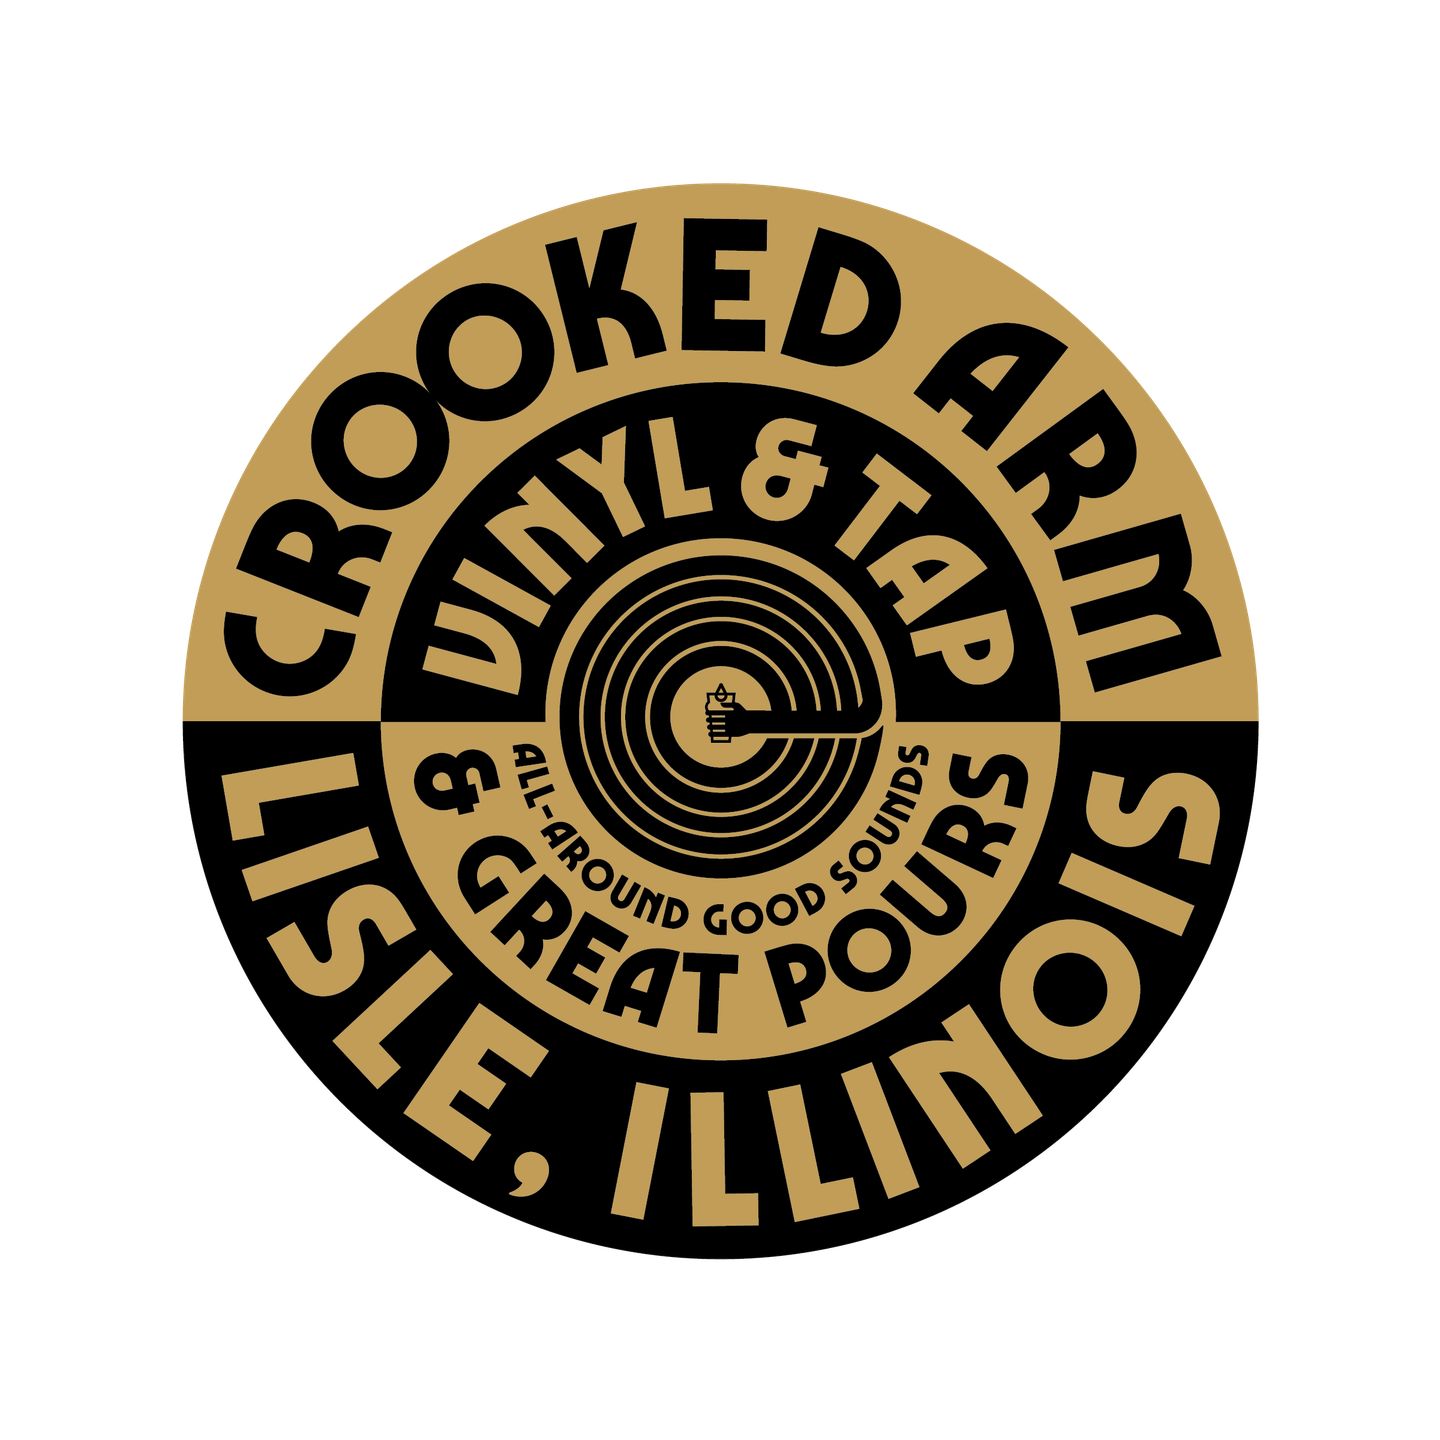 Crooked Arm Vinyl & Tap, a record store, craft beer tap room and bottle shop, is now open at 6450 College Road, in Lisle’s College Square Shopping Center.